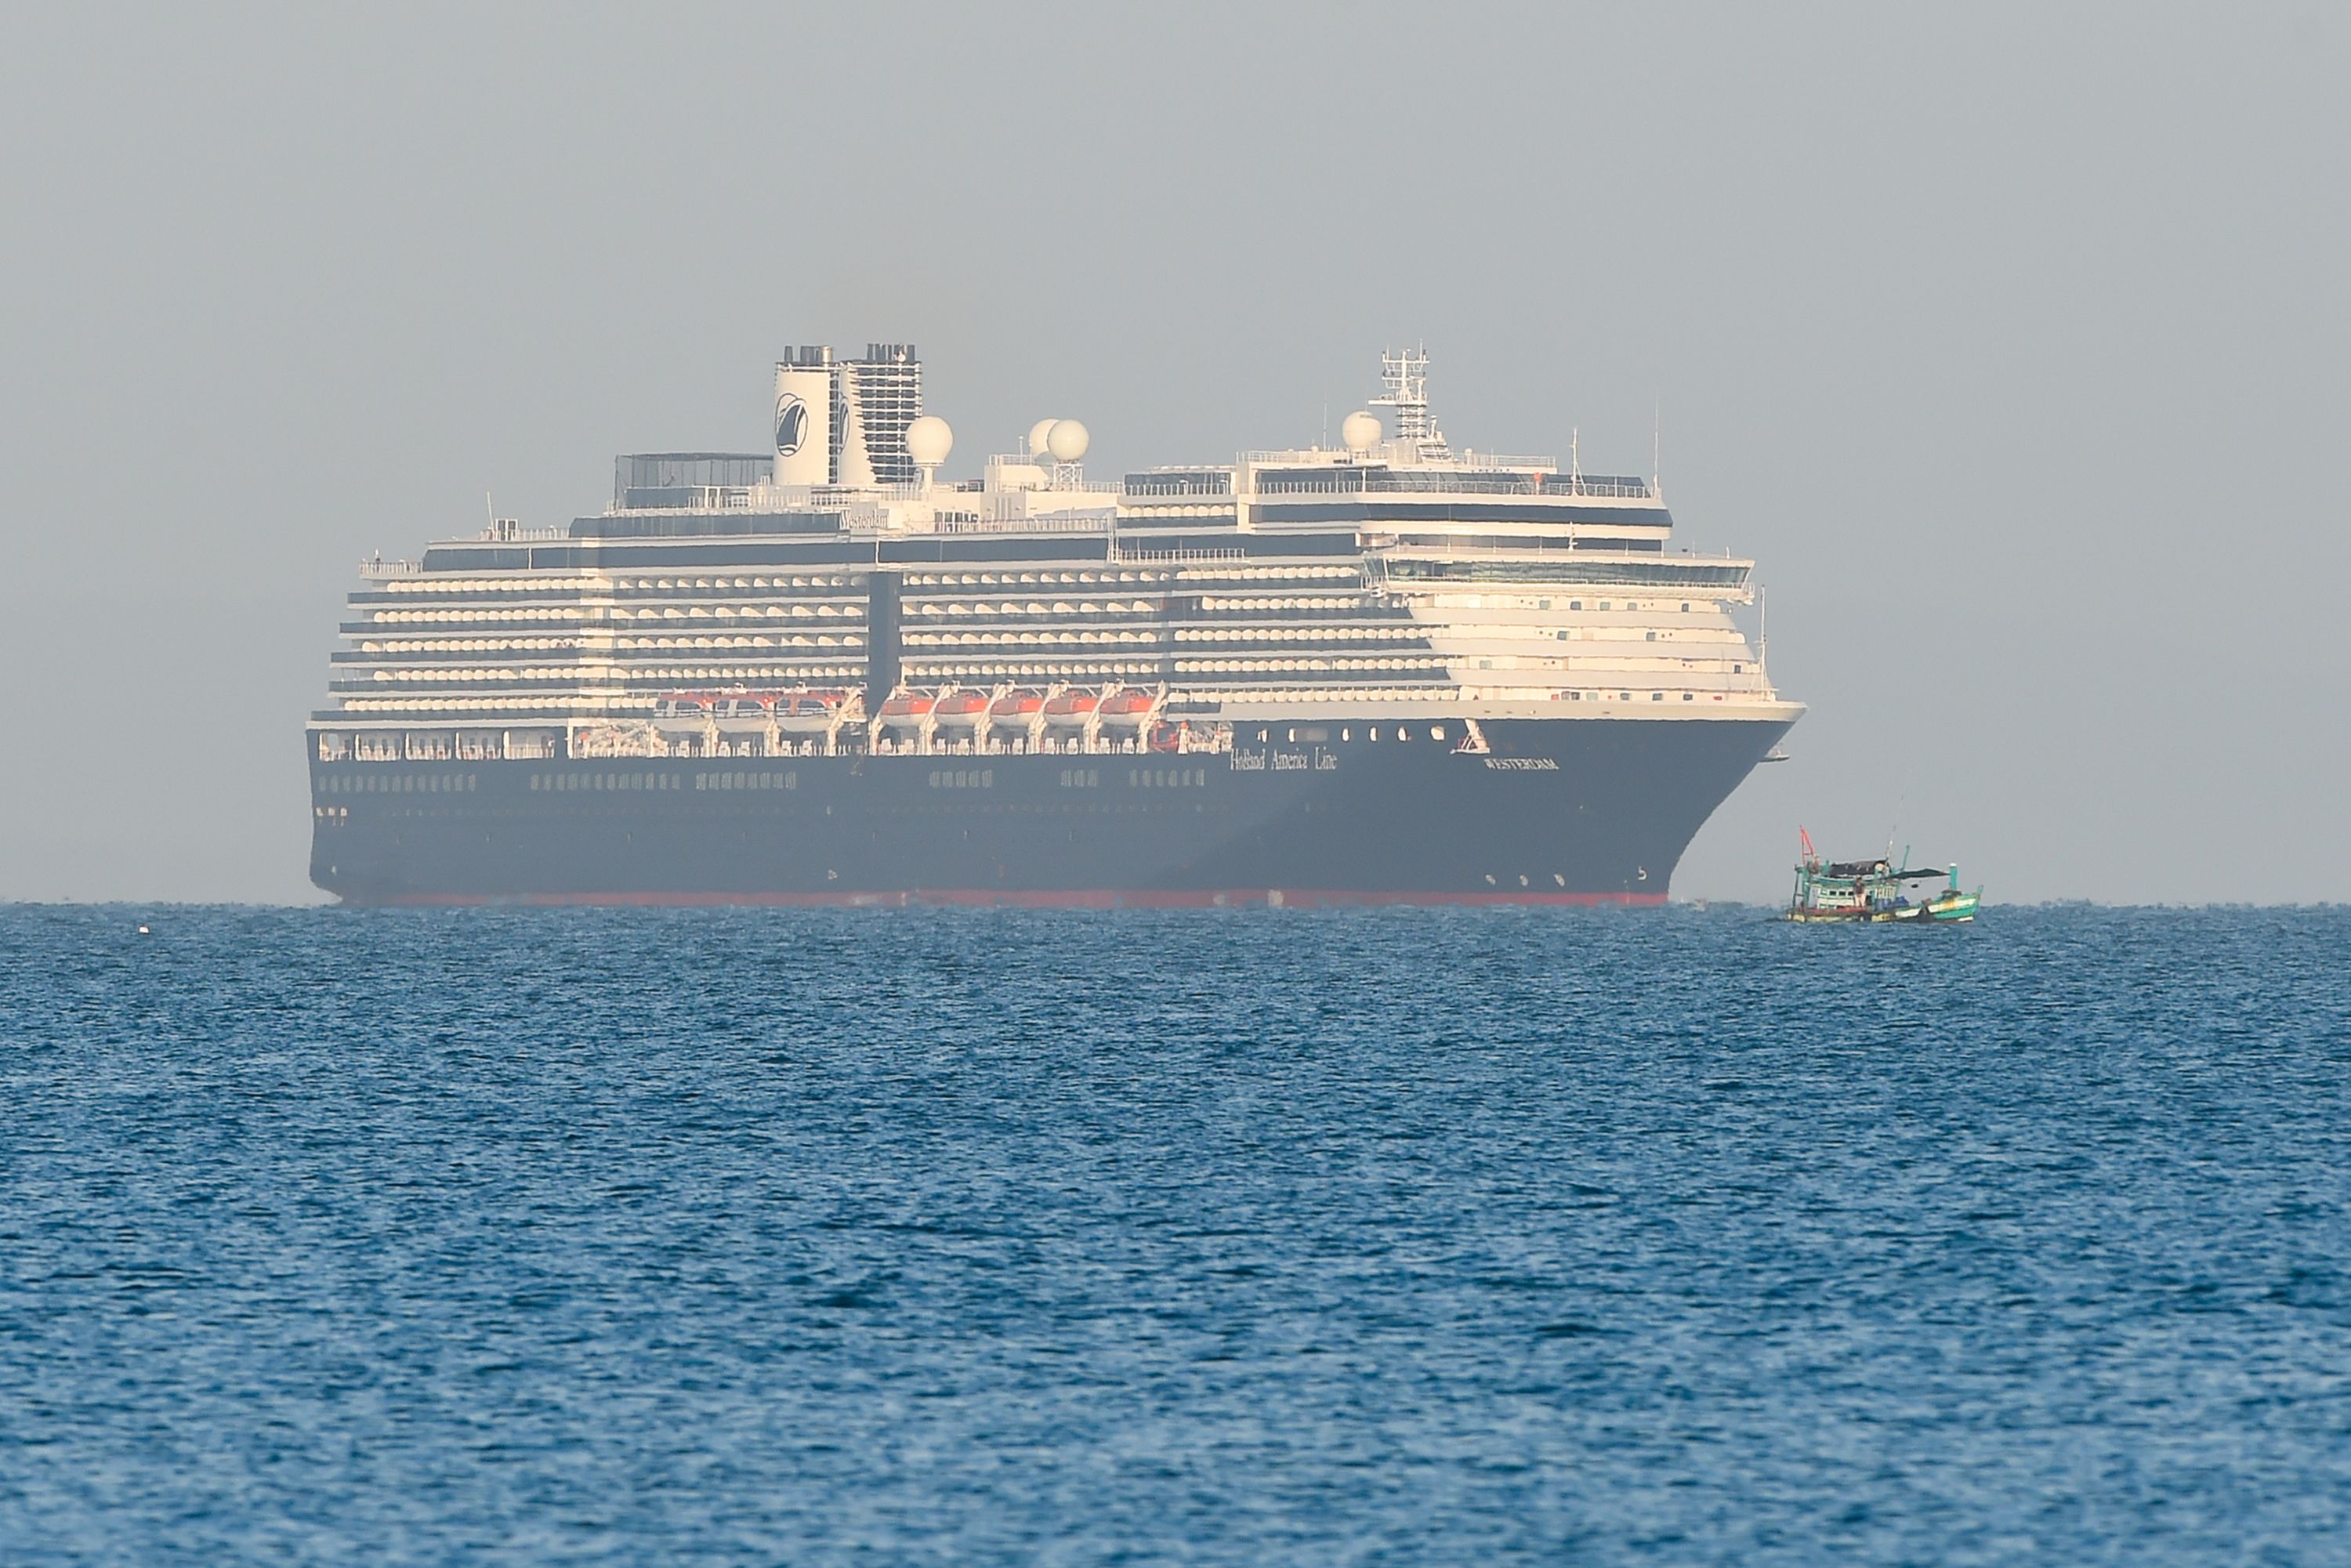 Here's the latest on the two cruise ships